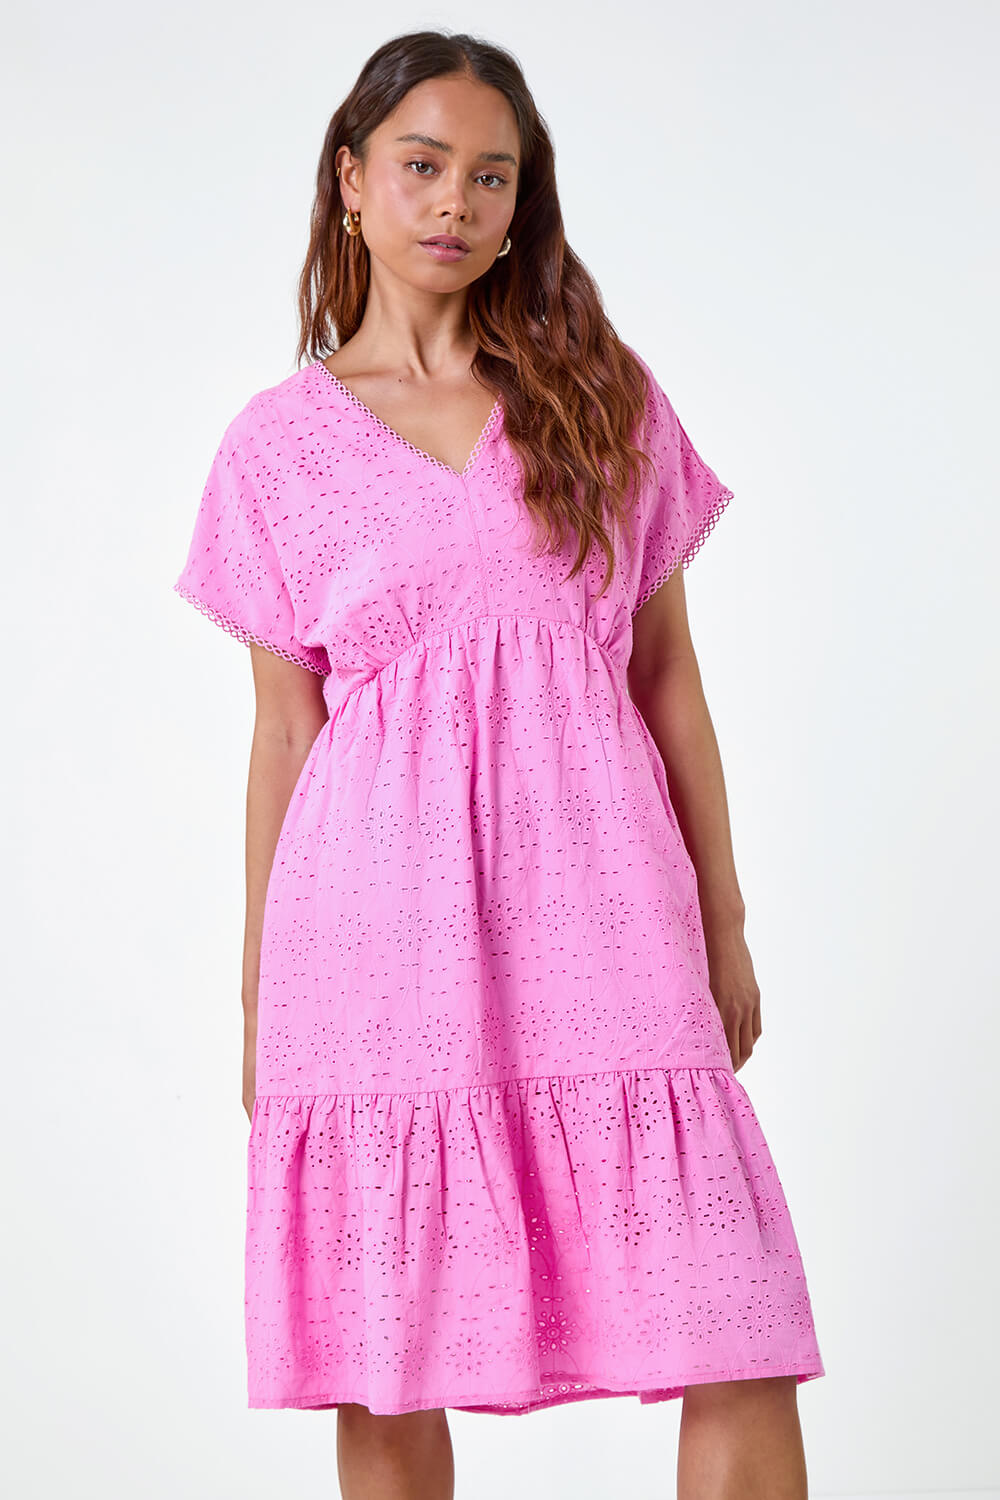 PINK Petite Cotton Broderie Tiered Dress, Image 4 of 5